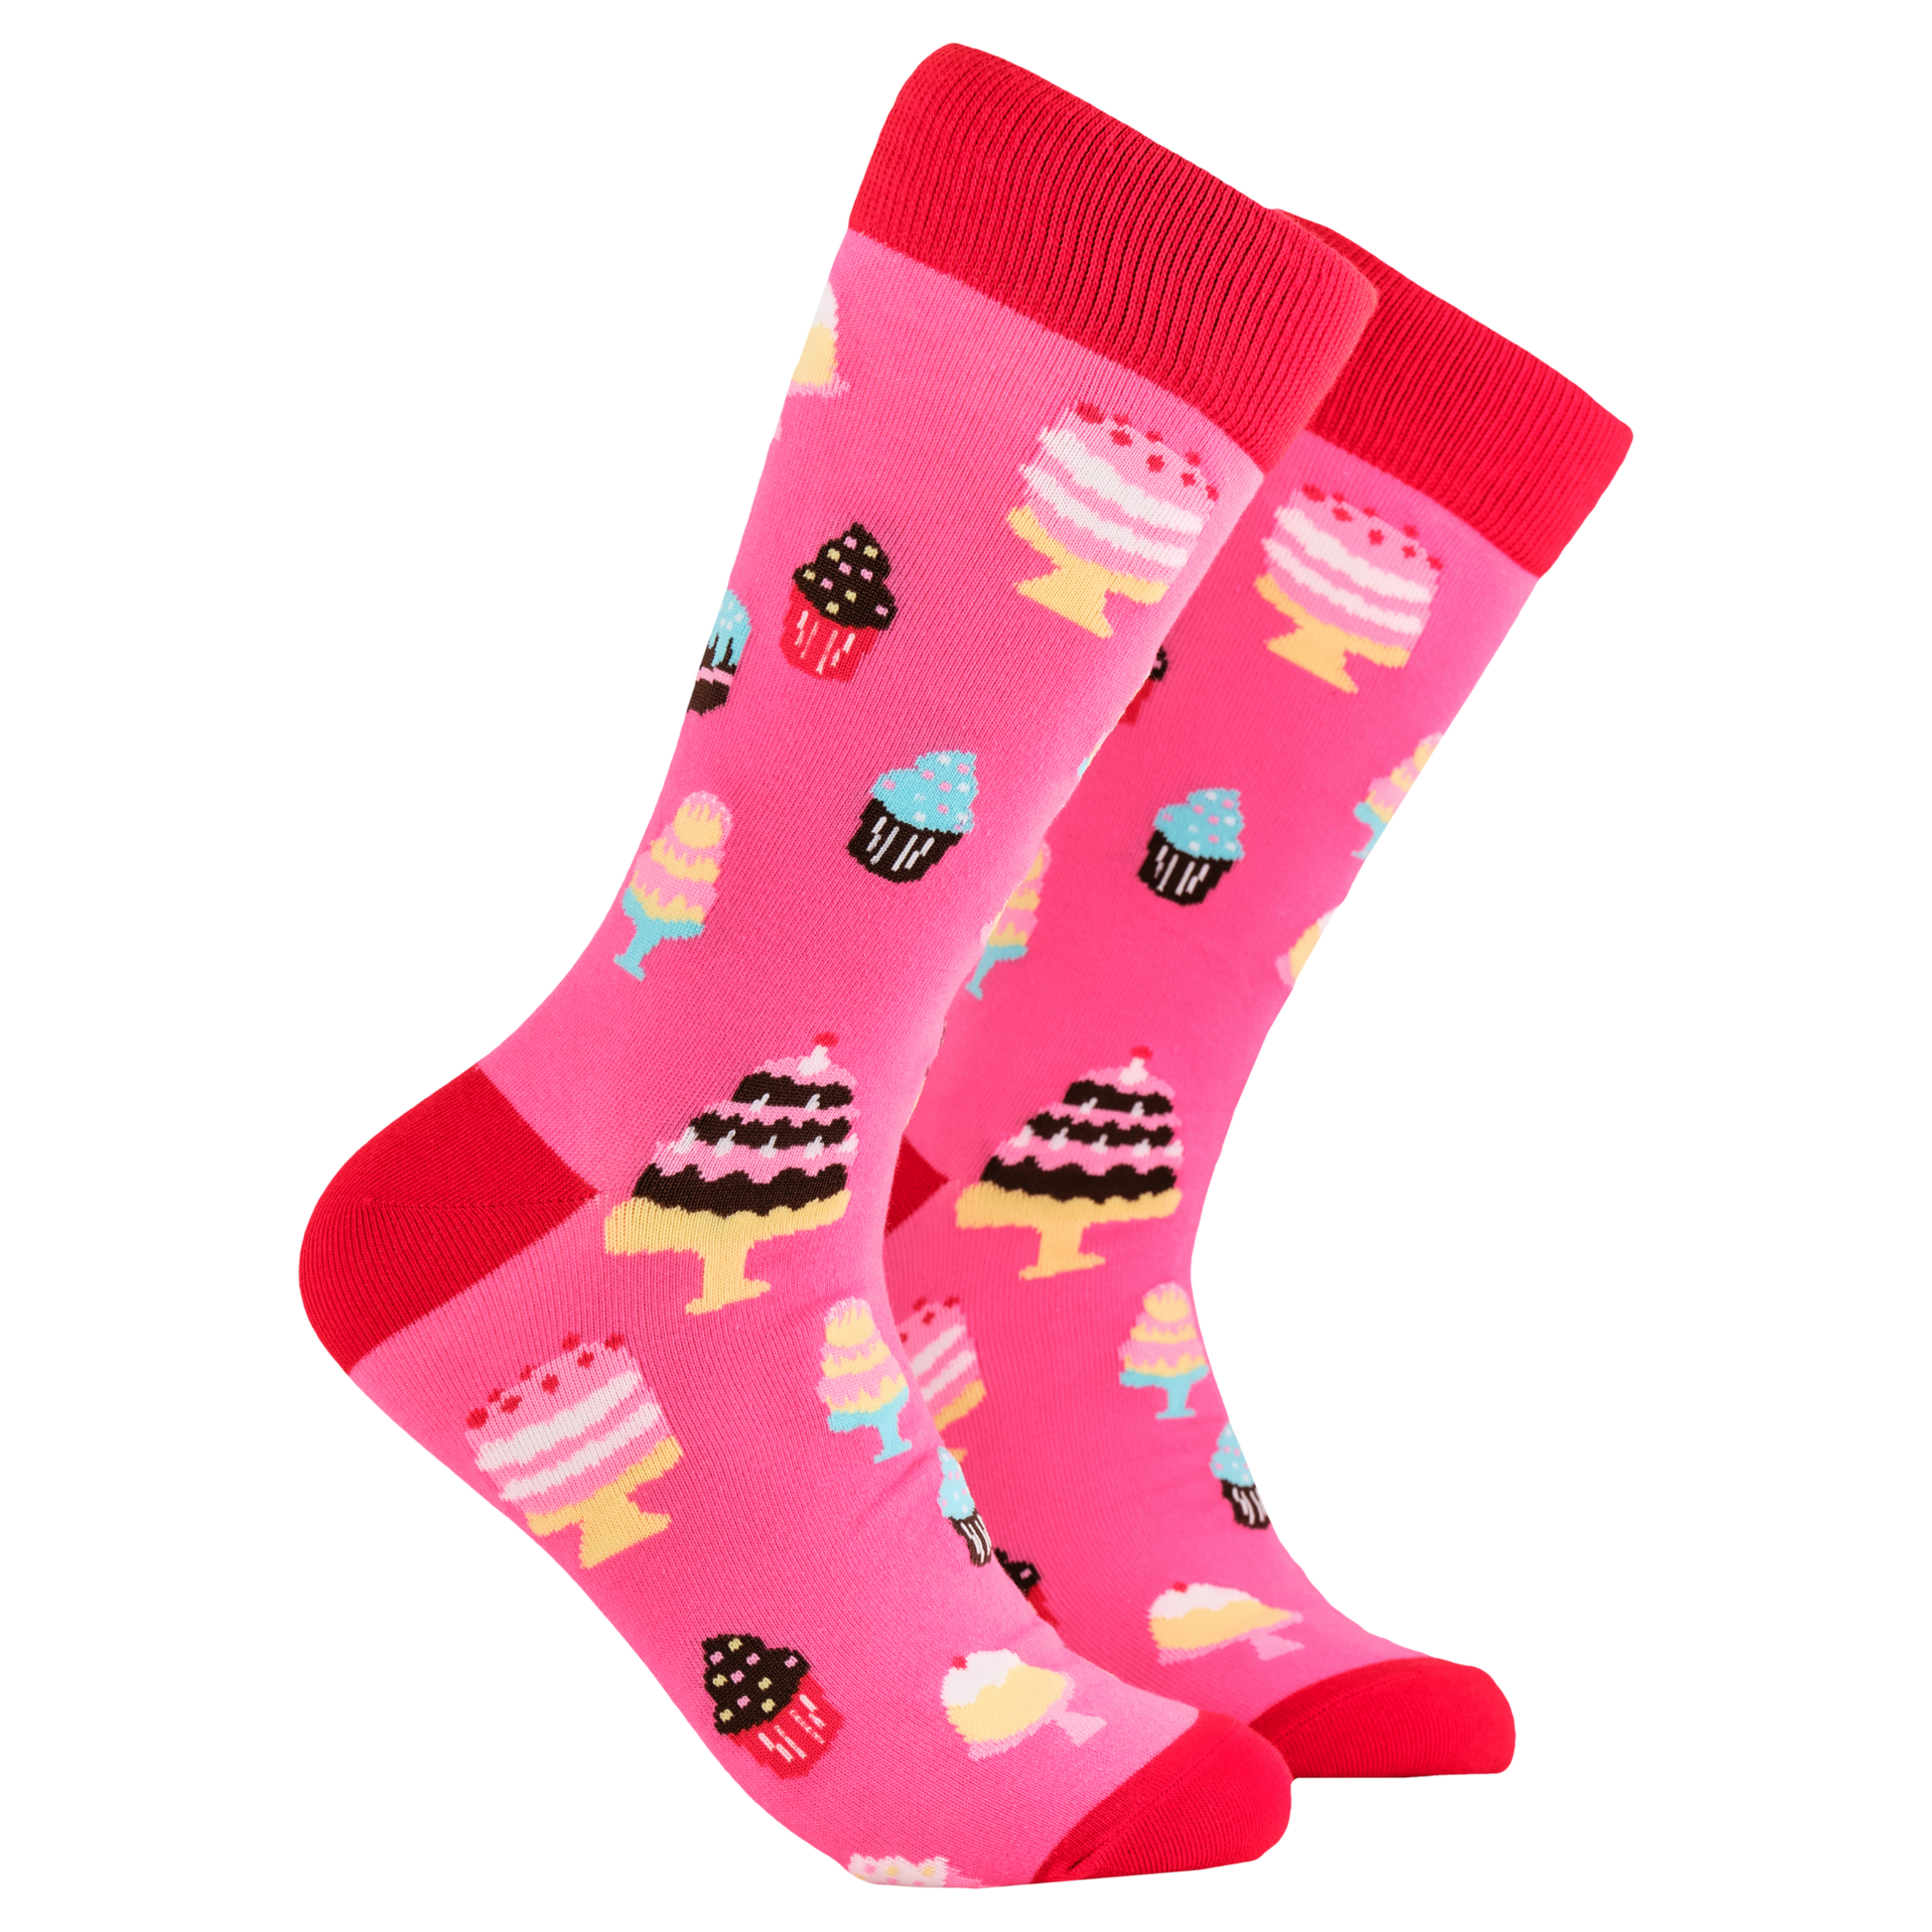 Cake Lover Socks. A pair of socks depicting cakes. Pink legs, red cuff, heel and toe.